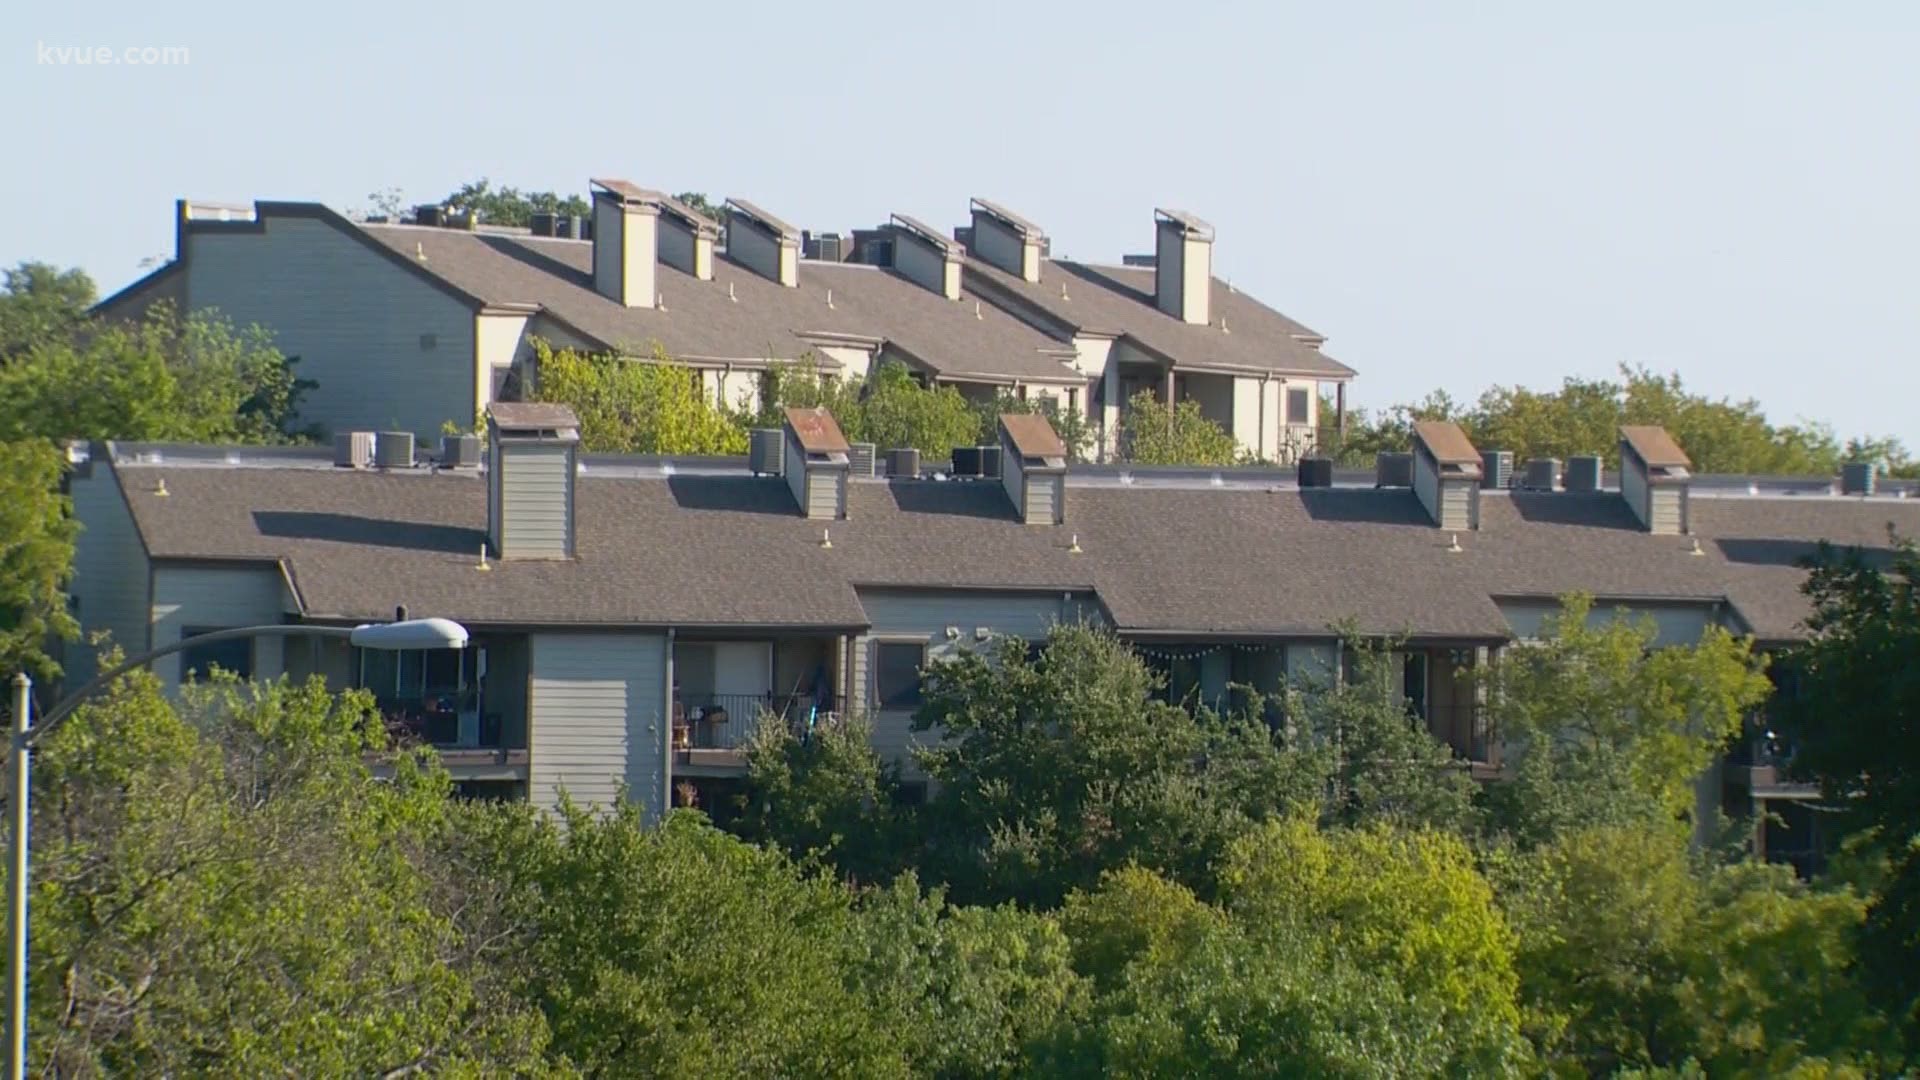 Landlords are asking for more protections after Travis County extended the ban on evictions until the end of December.